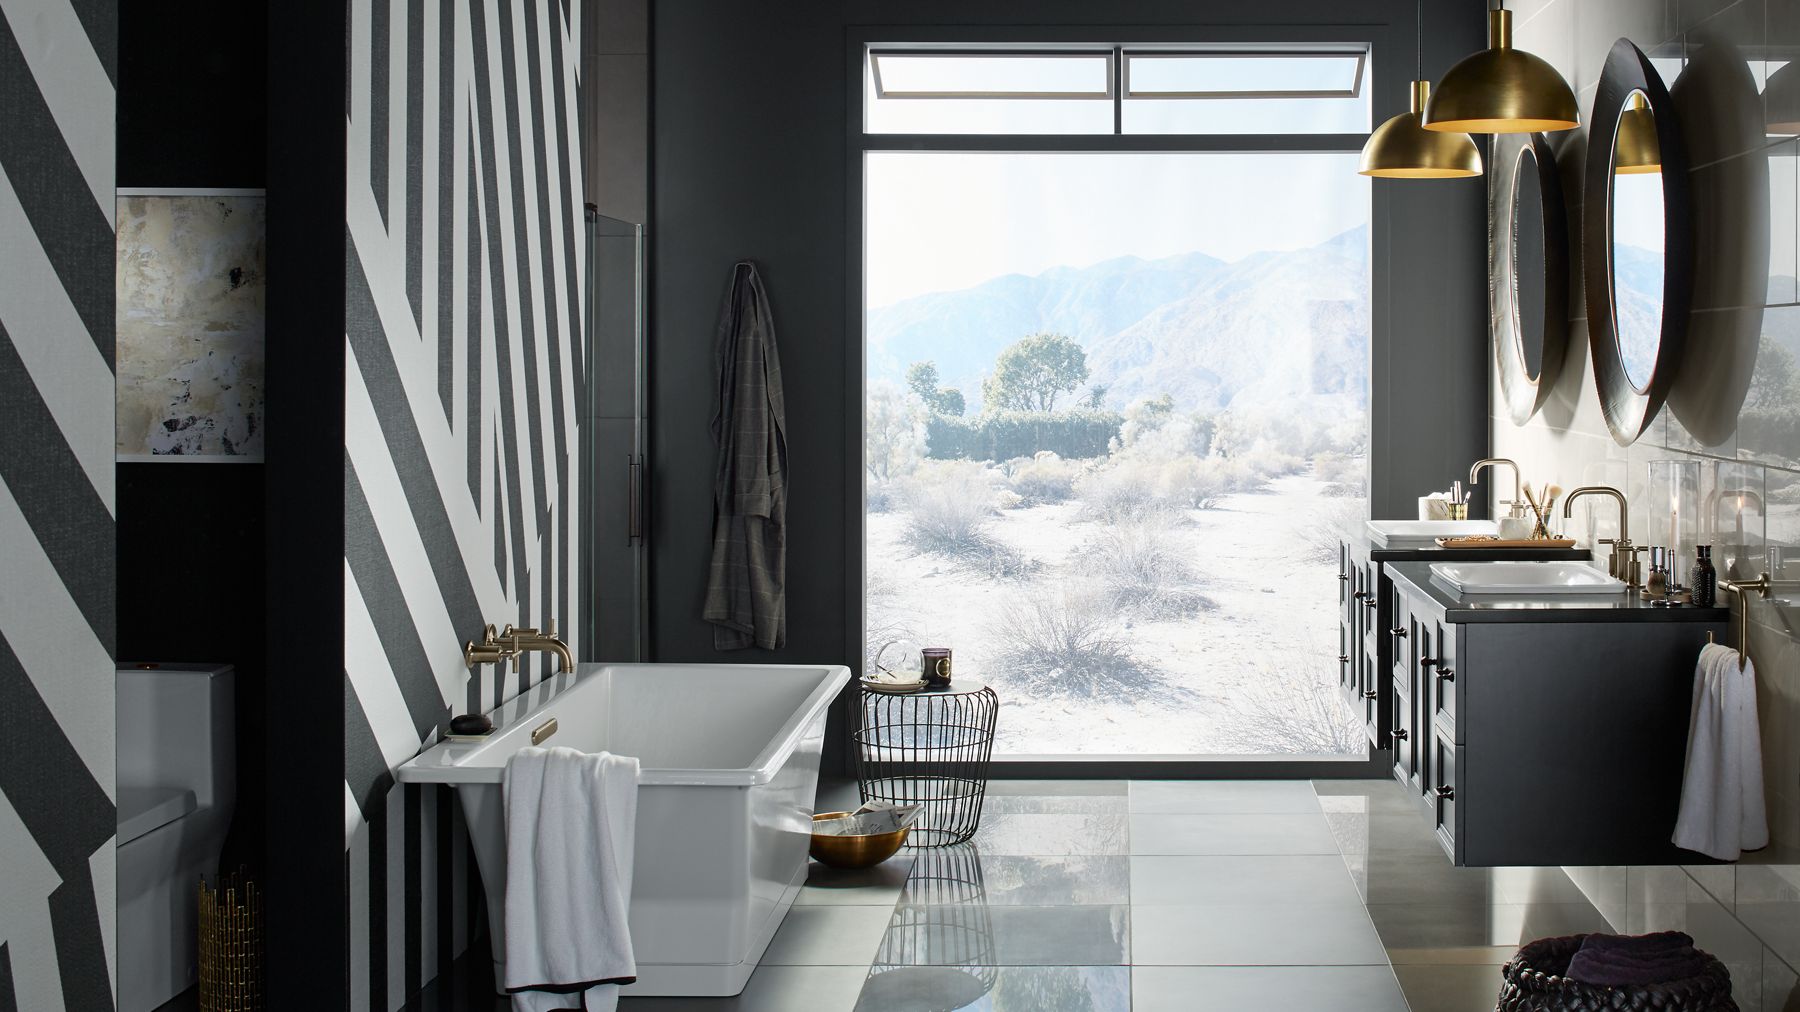 Safari-insipired bathroom with graphic stripes and window with desert view